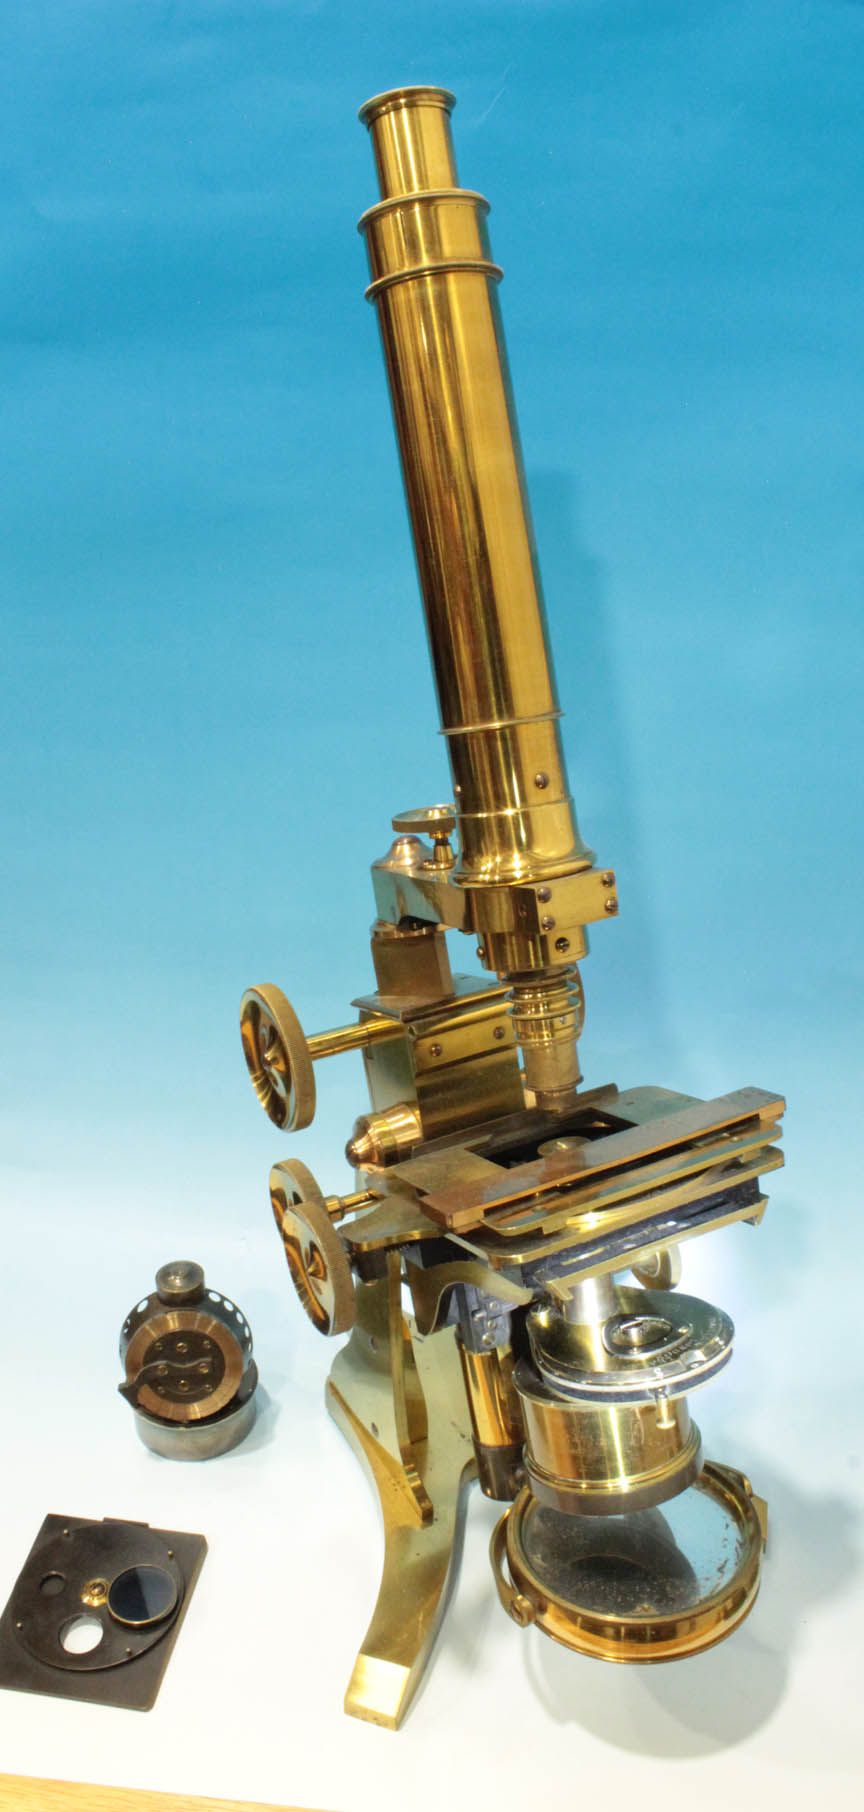 The Powell and Lealand microscope High Power Achromatic Condenser on Ross Microscope